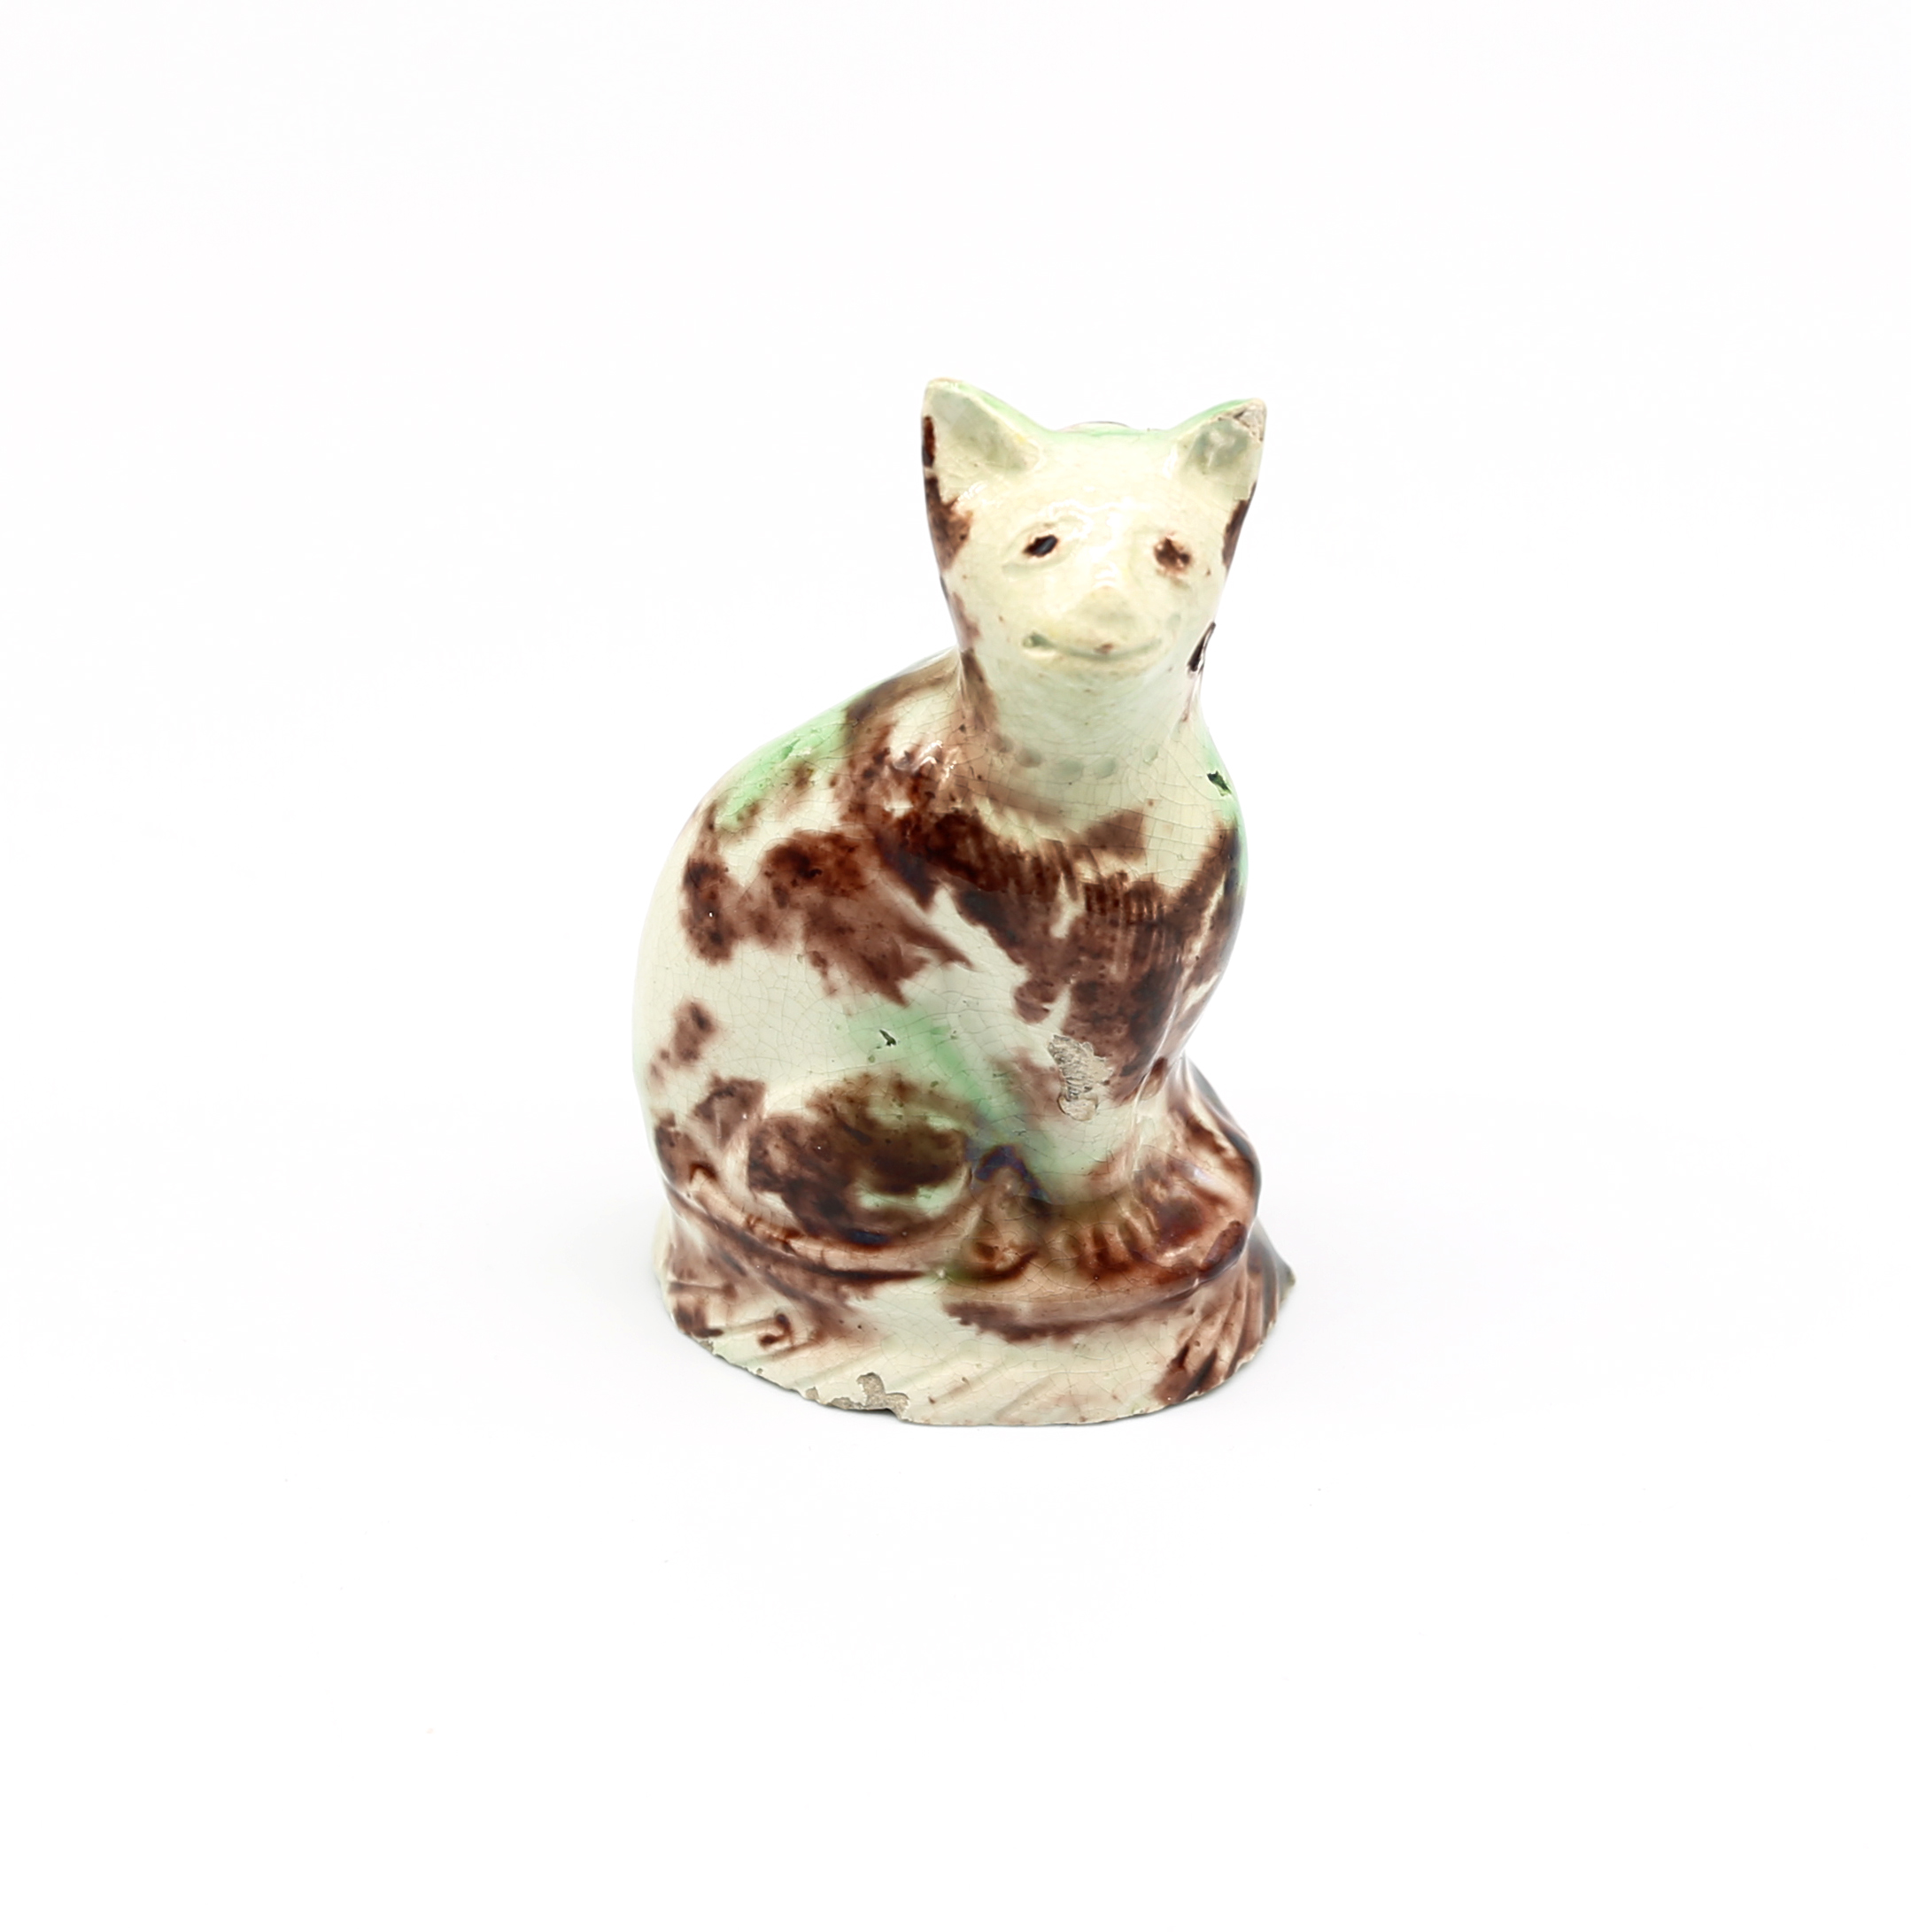 A small Staffordshire Whieldon creamware seated cat, sponge decorated in shades of green and brown